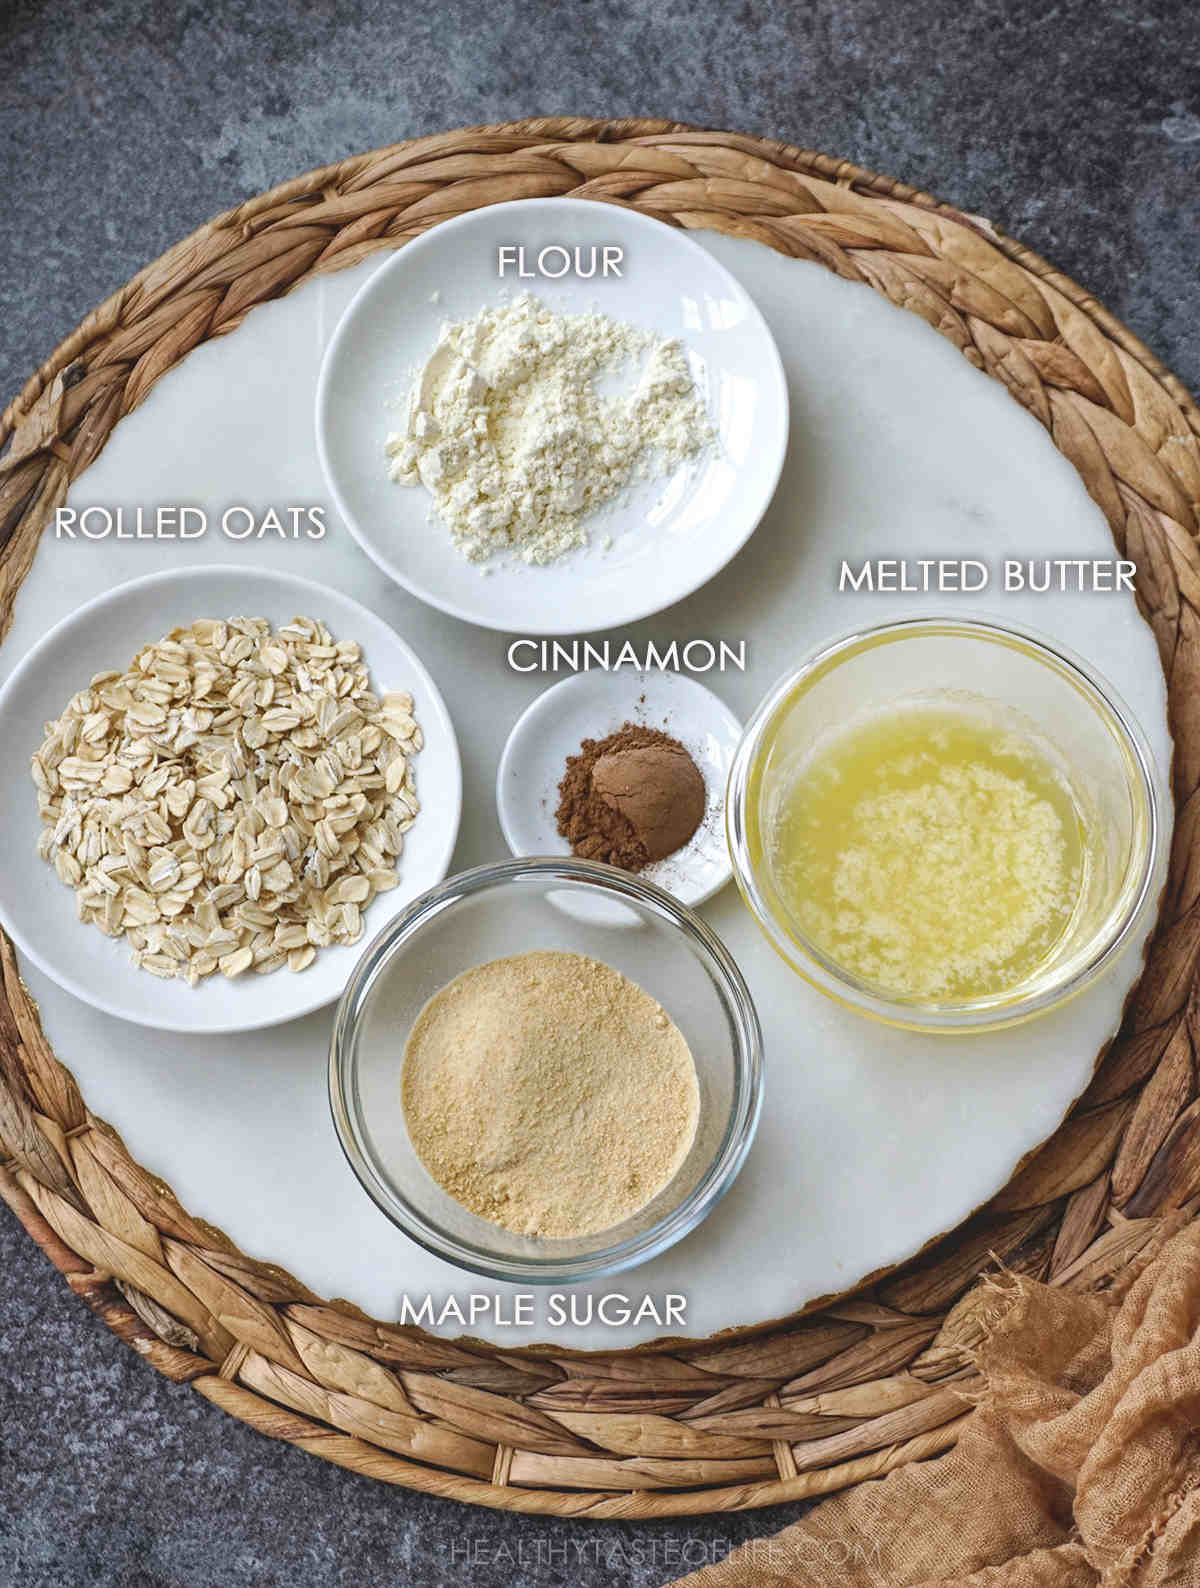 Ingredients for making the muffin crumb displayed on a board.